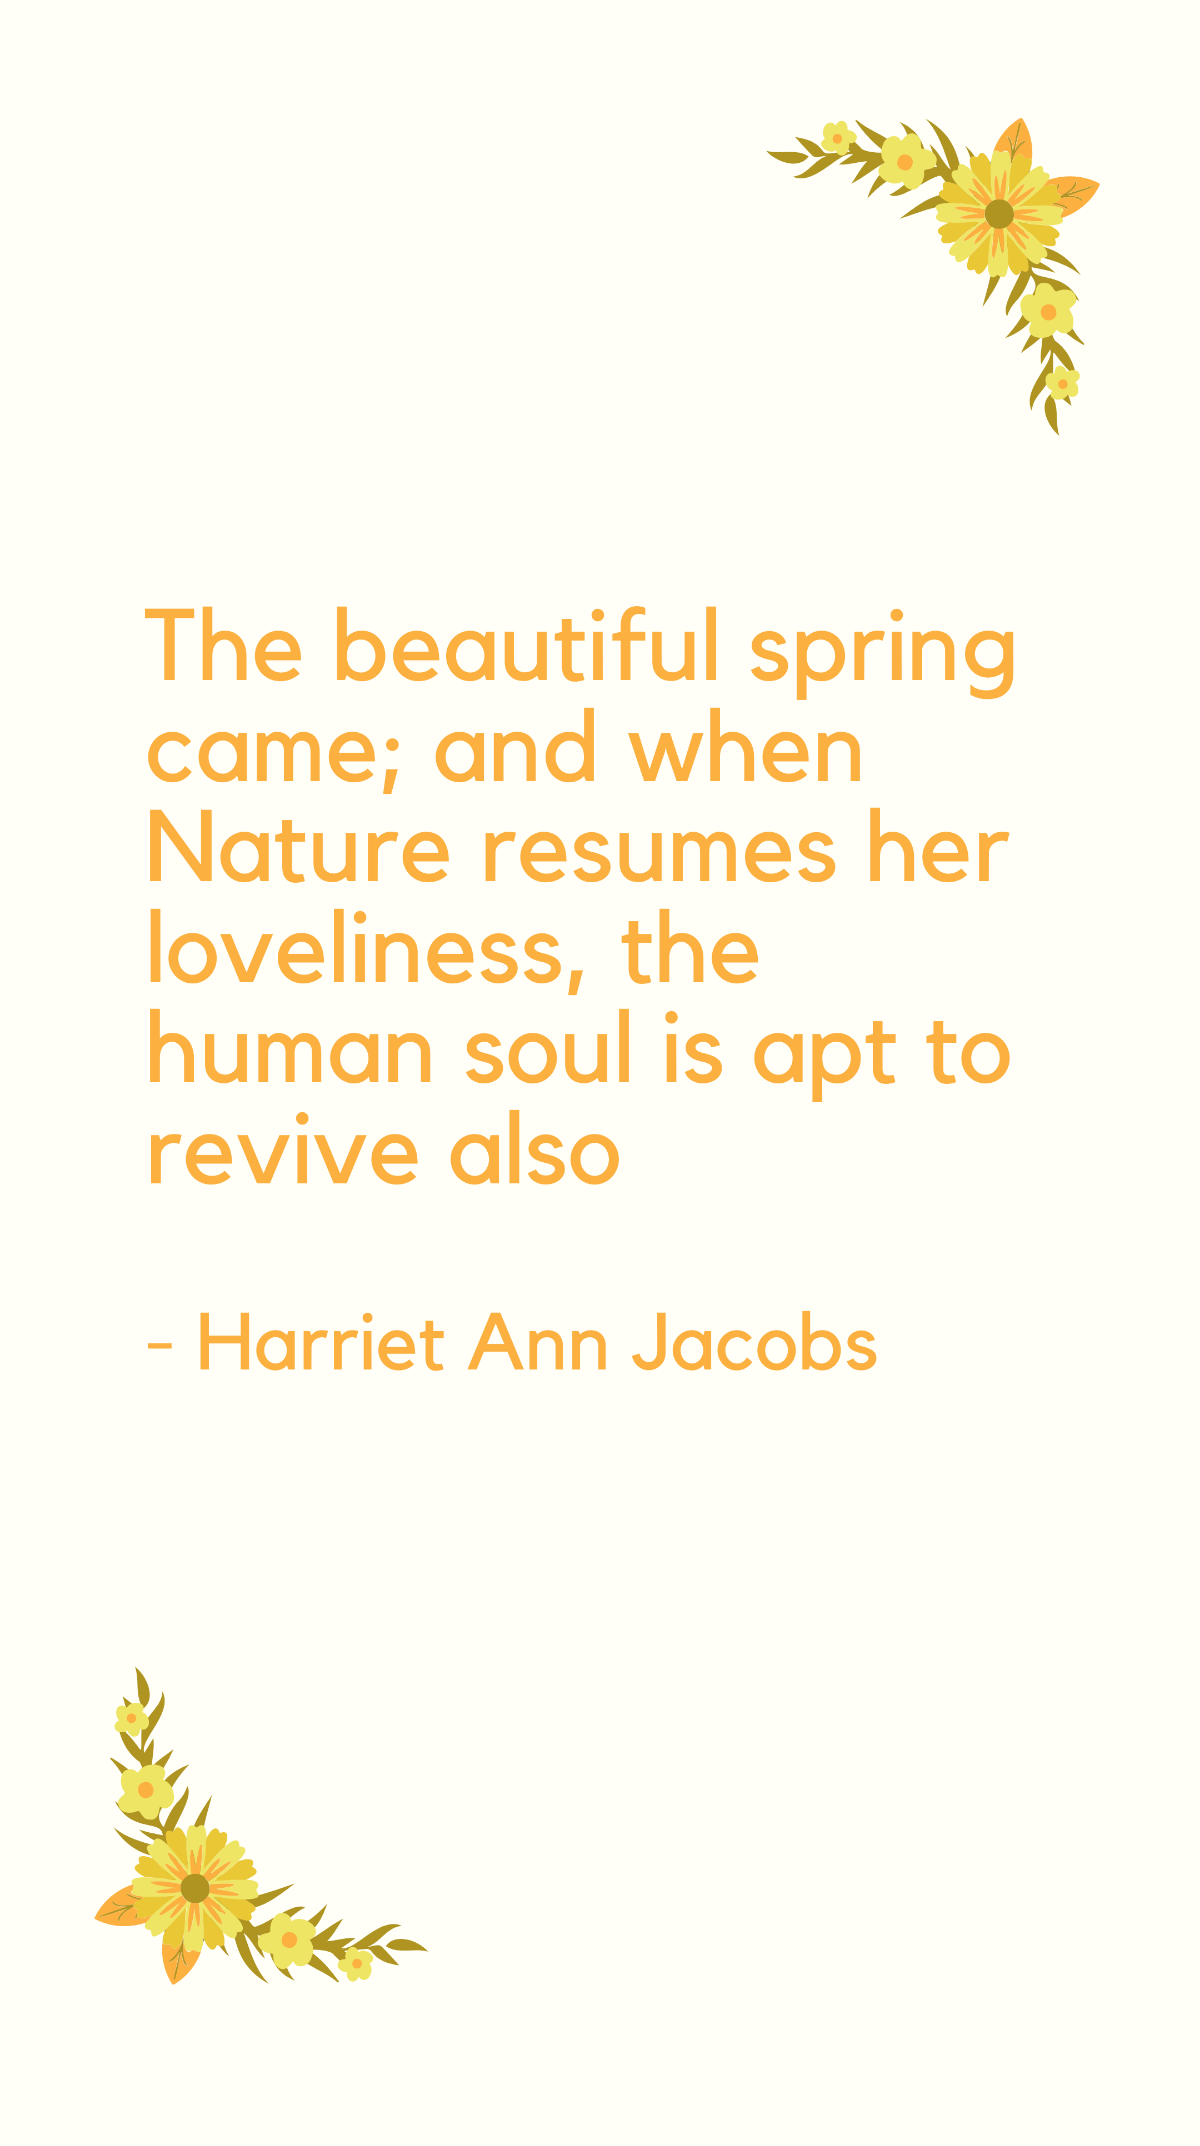 Harriet Ann Jacobs - The beautiful spring came; and when Nature resumes her loveliness, the human soul is apt to revive also Template